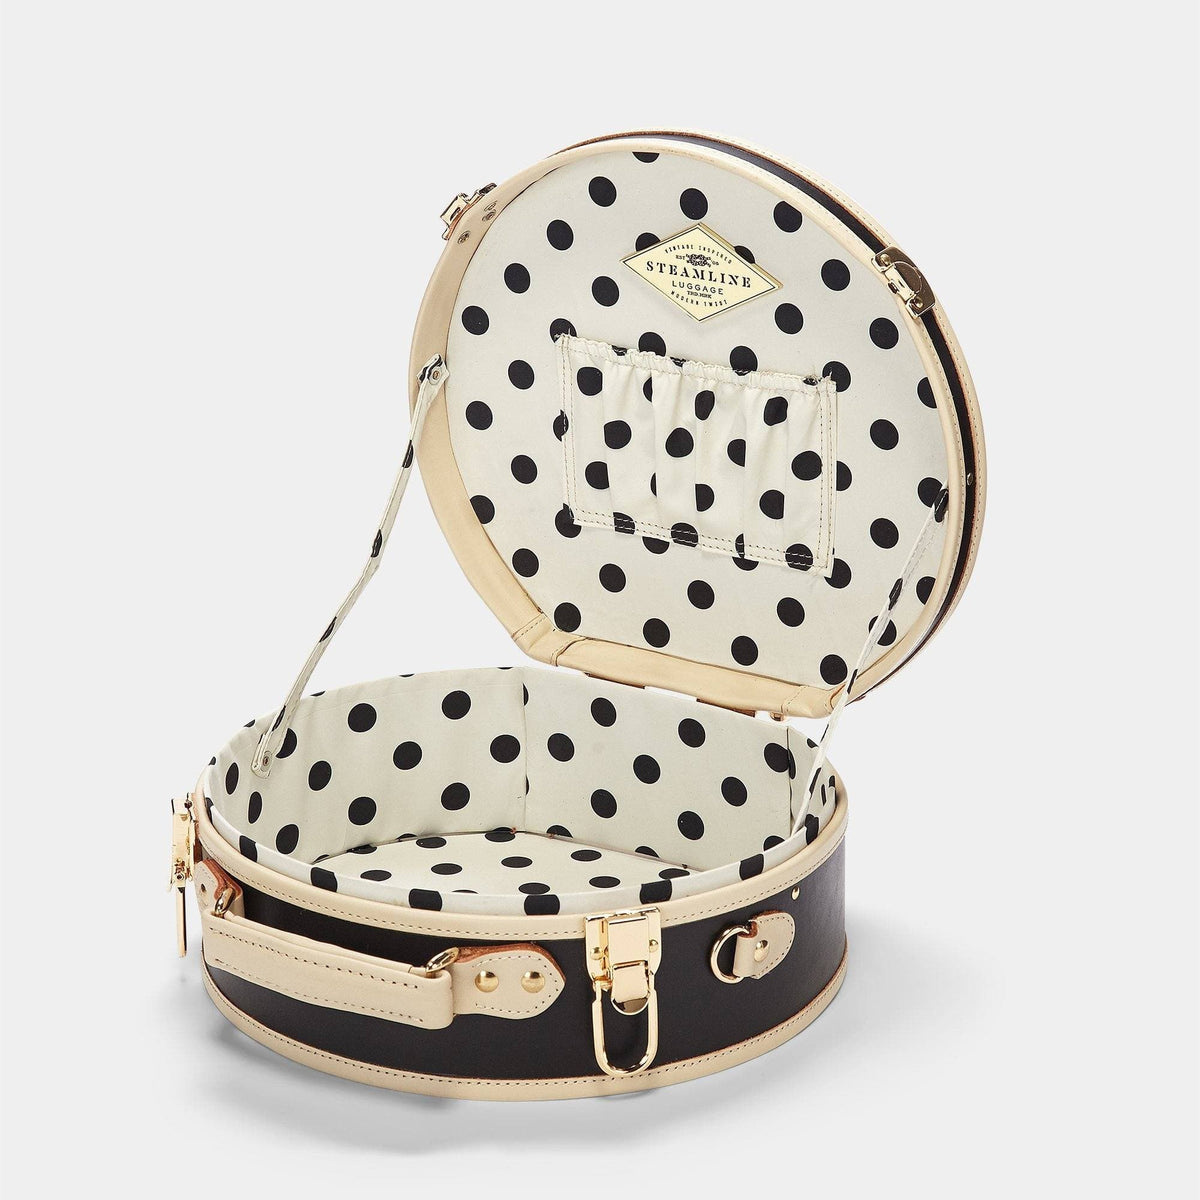 The Starlet - Hatbox Small Hatbox Small Steamline Luggage 